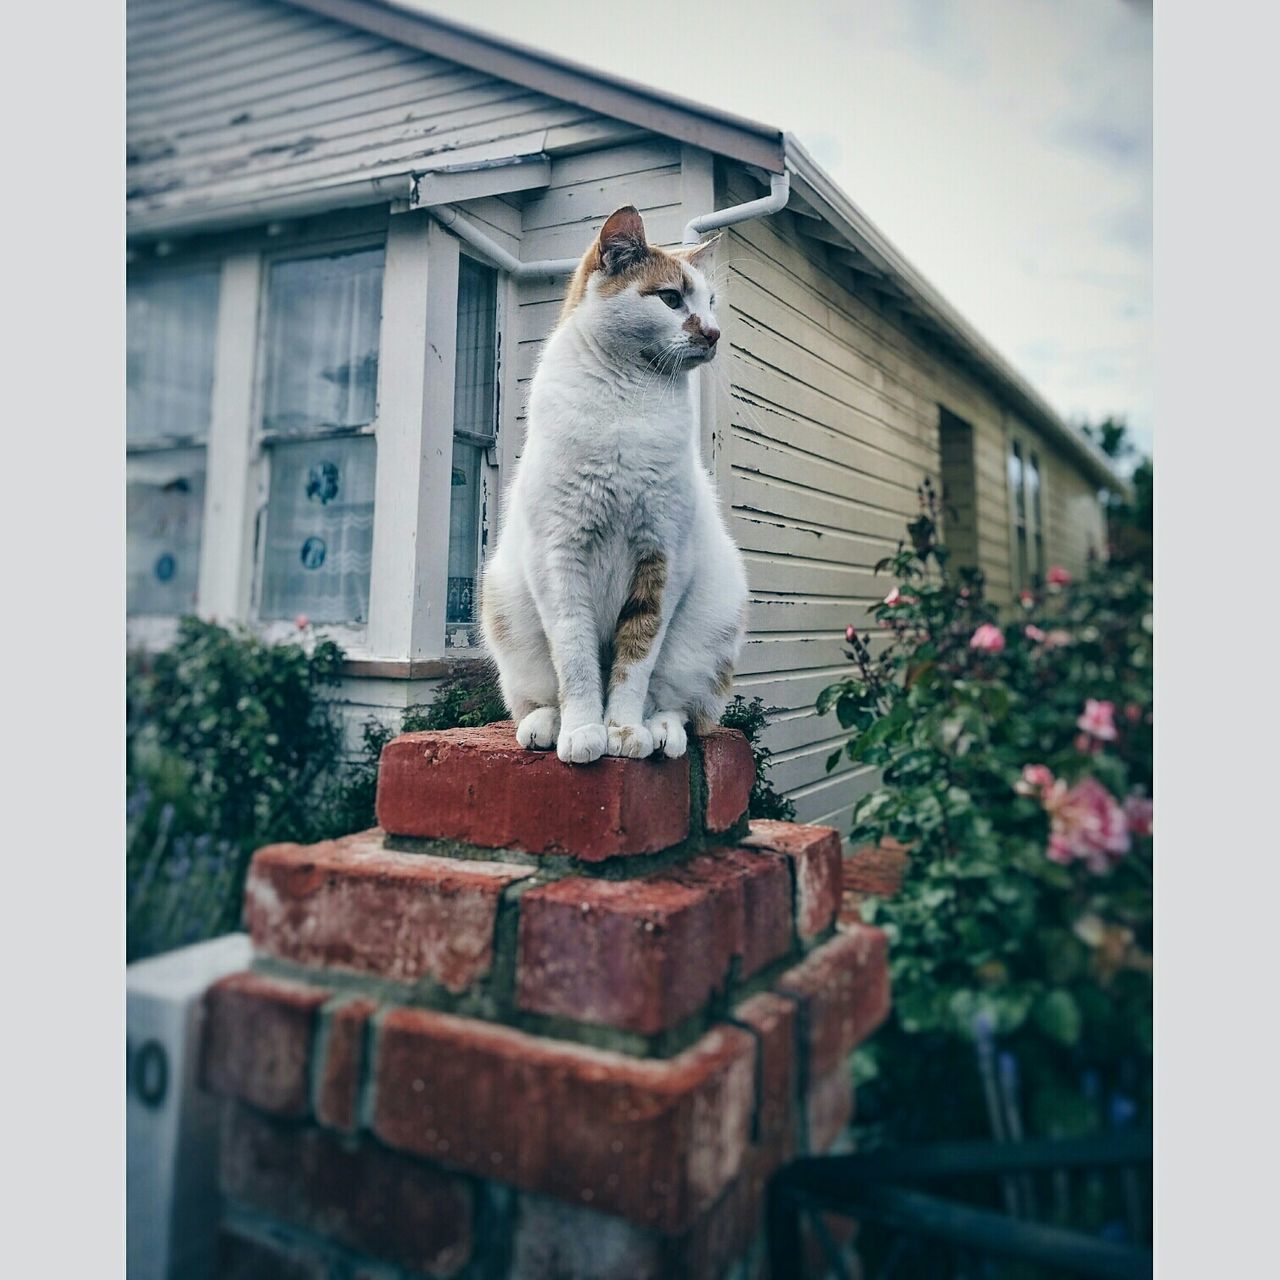 animal themes, one animal, building exterior, domestic animals, pets, built structure, architecture, mammal, house, domestic cat, window, sky, low angle view, day, transfer print, residential structure, sitting, zoology, cat, no people